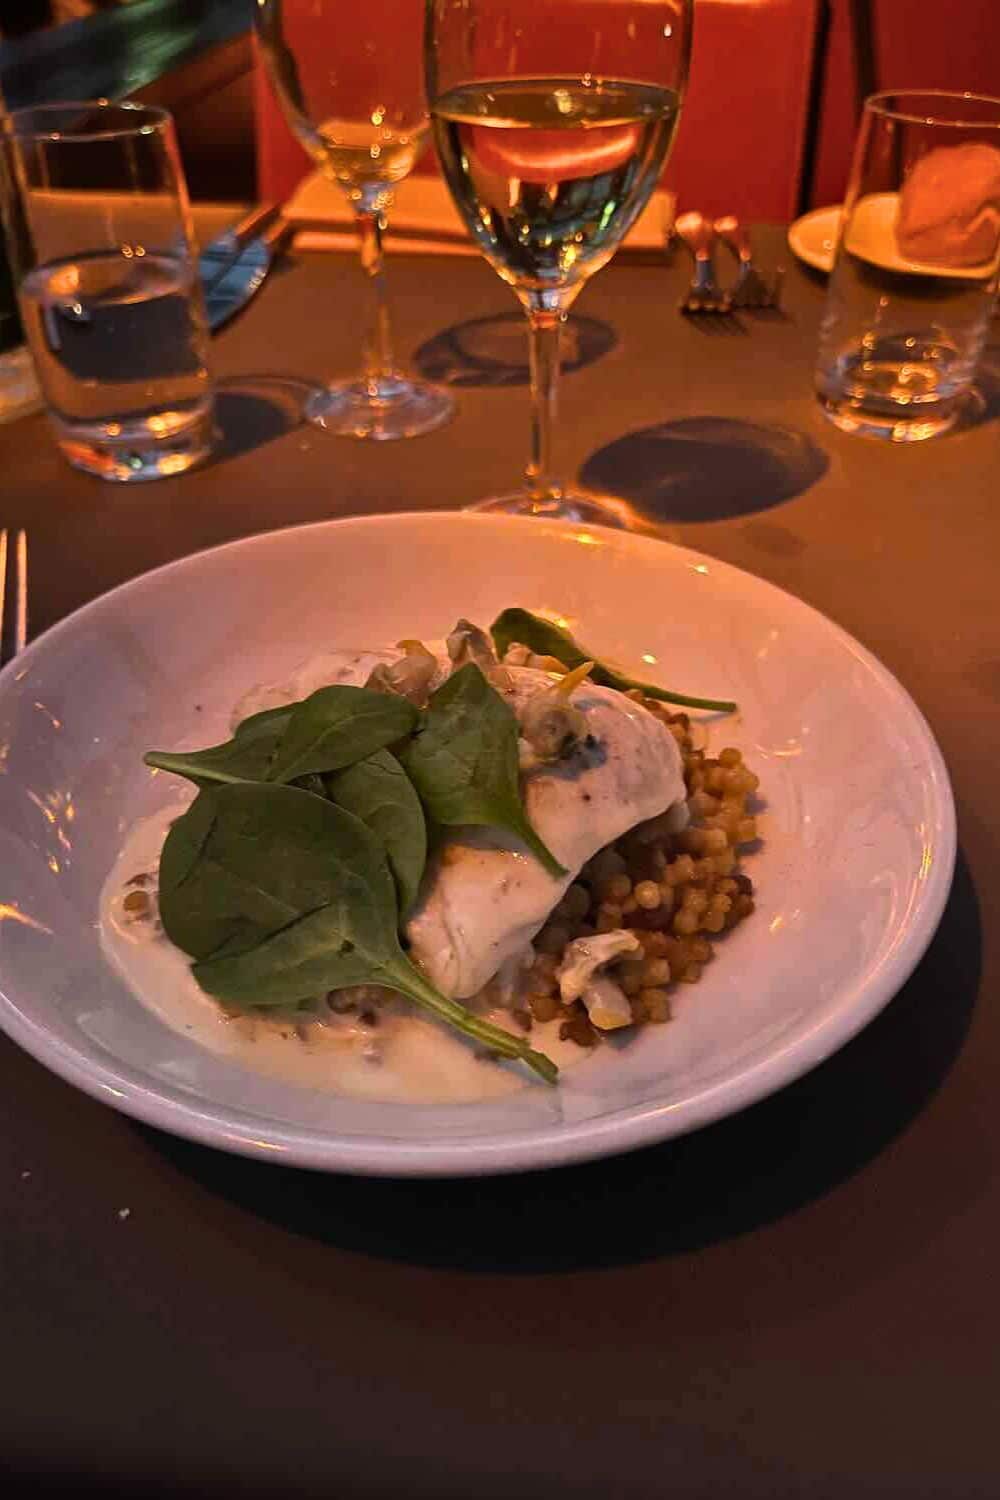 A plate of fish served over a bed of lentils and topped with fresh spinach, presented on a white plate in an intimate dining setting with ambient lighting and glasses of water and wine.